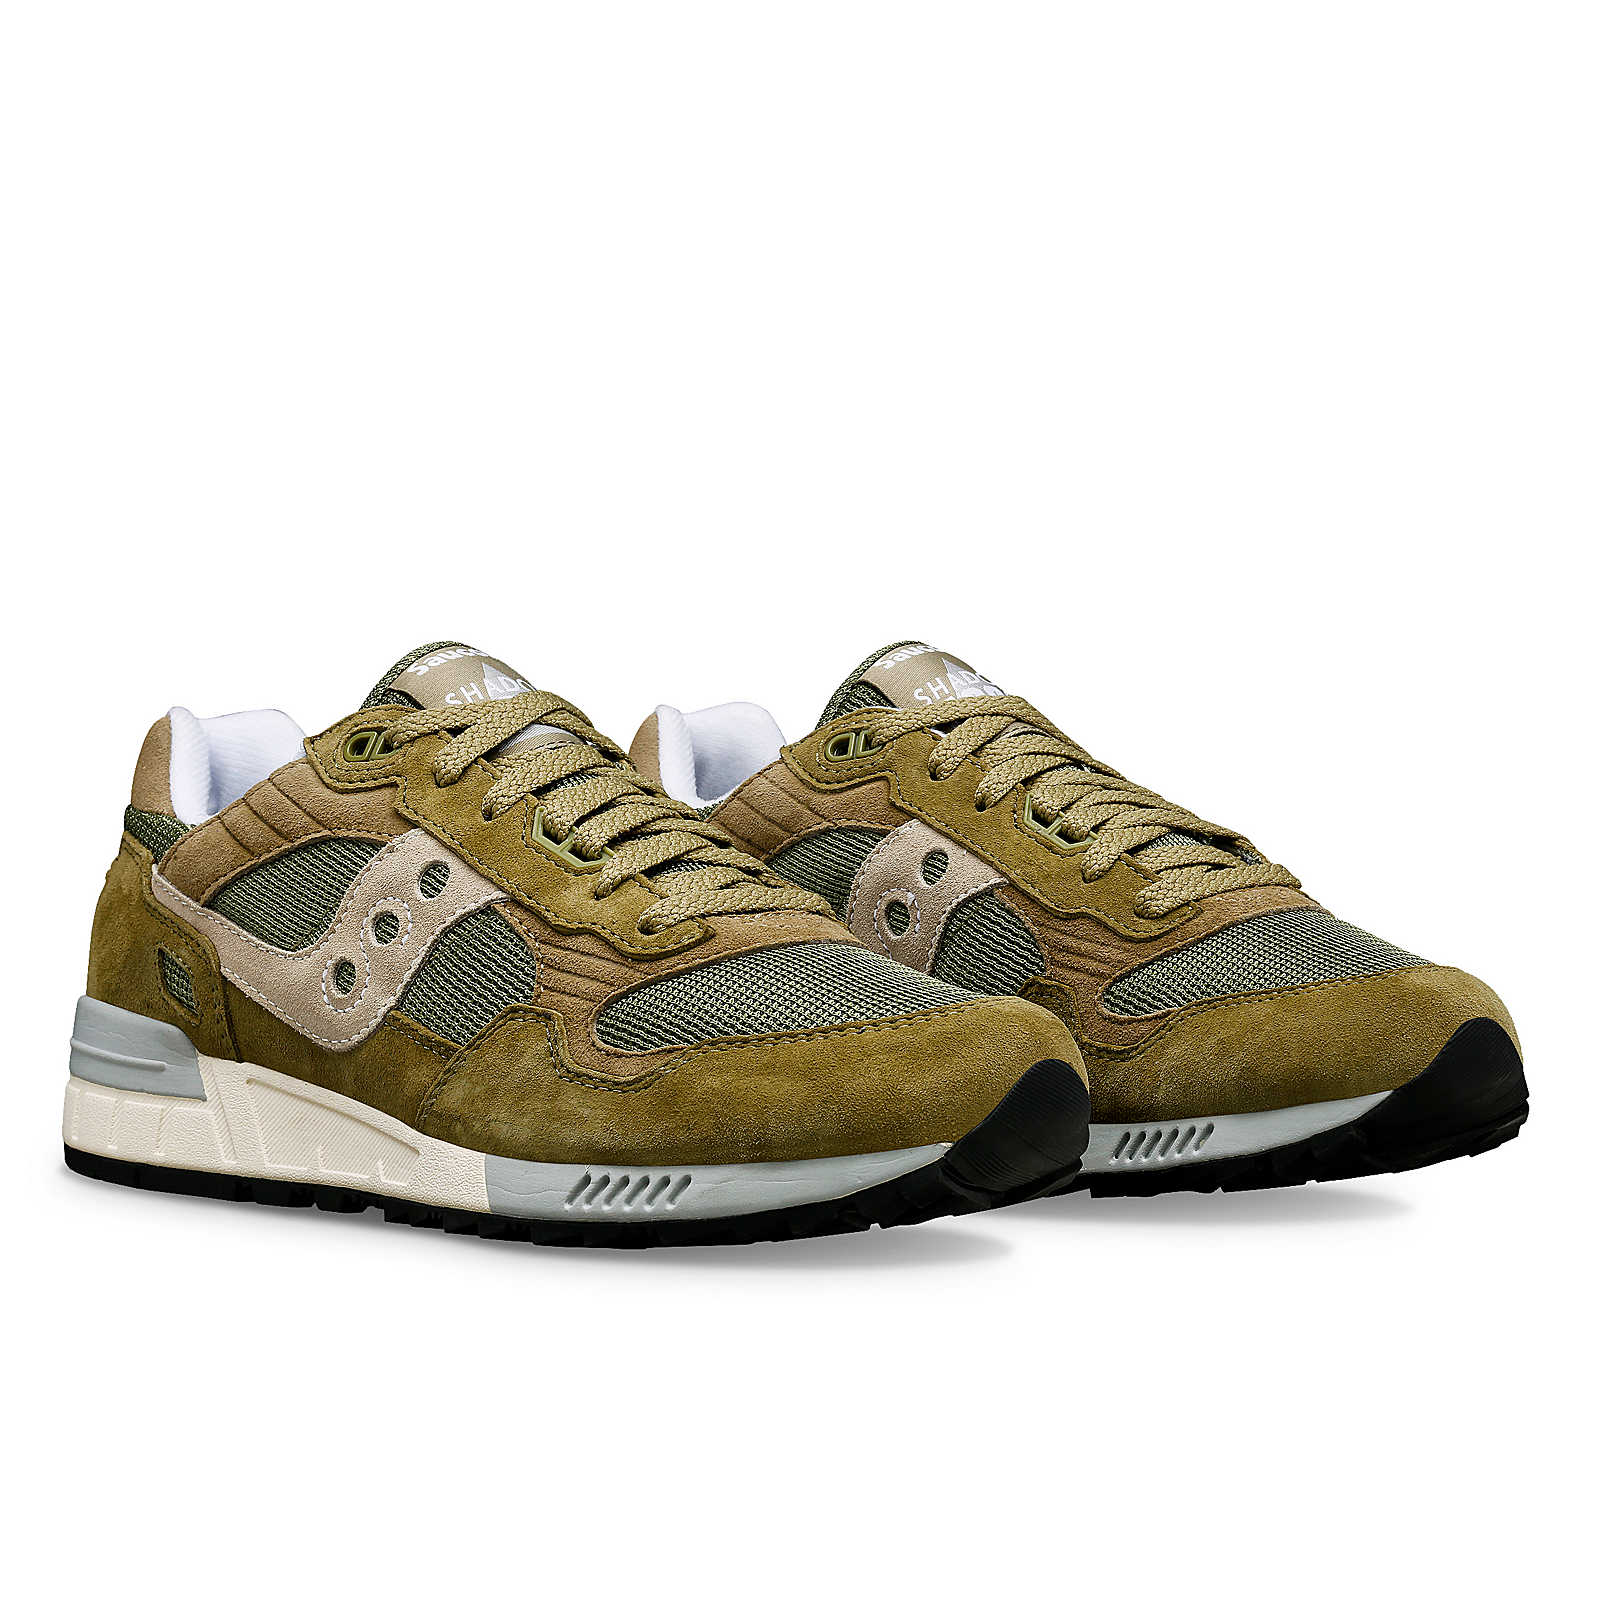 Saucony Mens Shadow 5000 Trainers - Sage Green